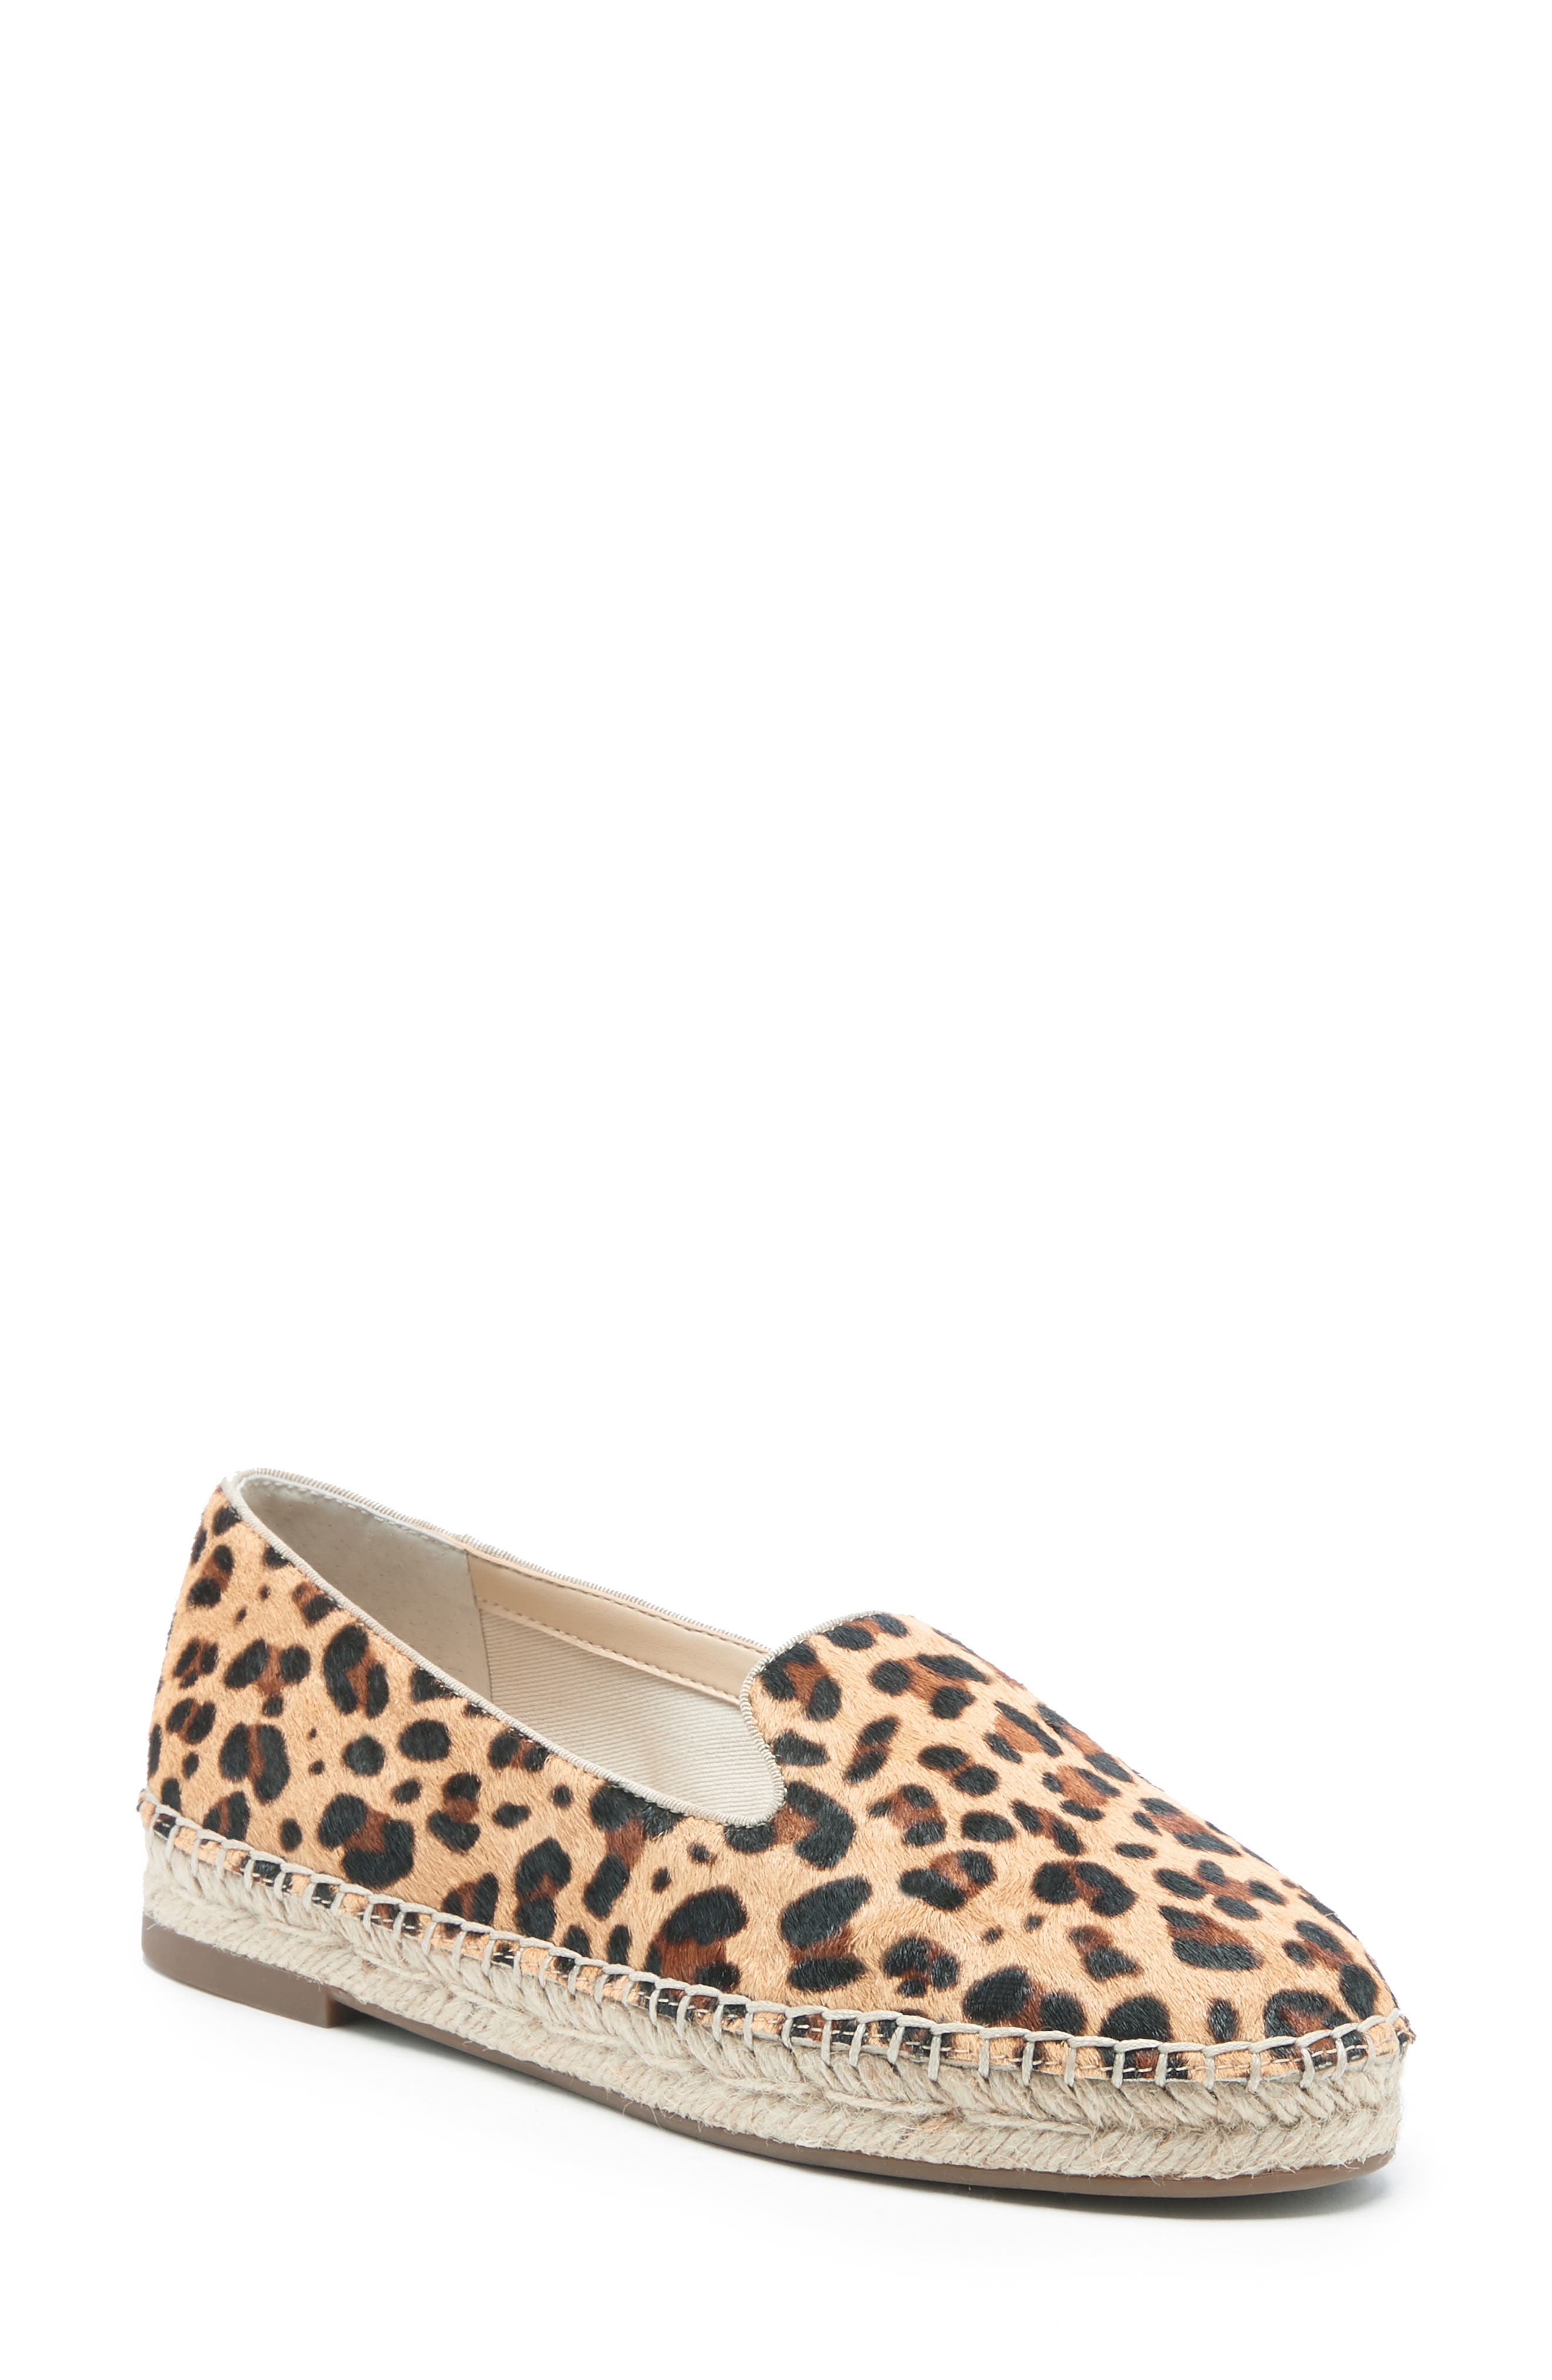 sole society leopard espadrilles